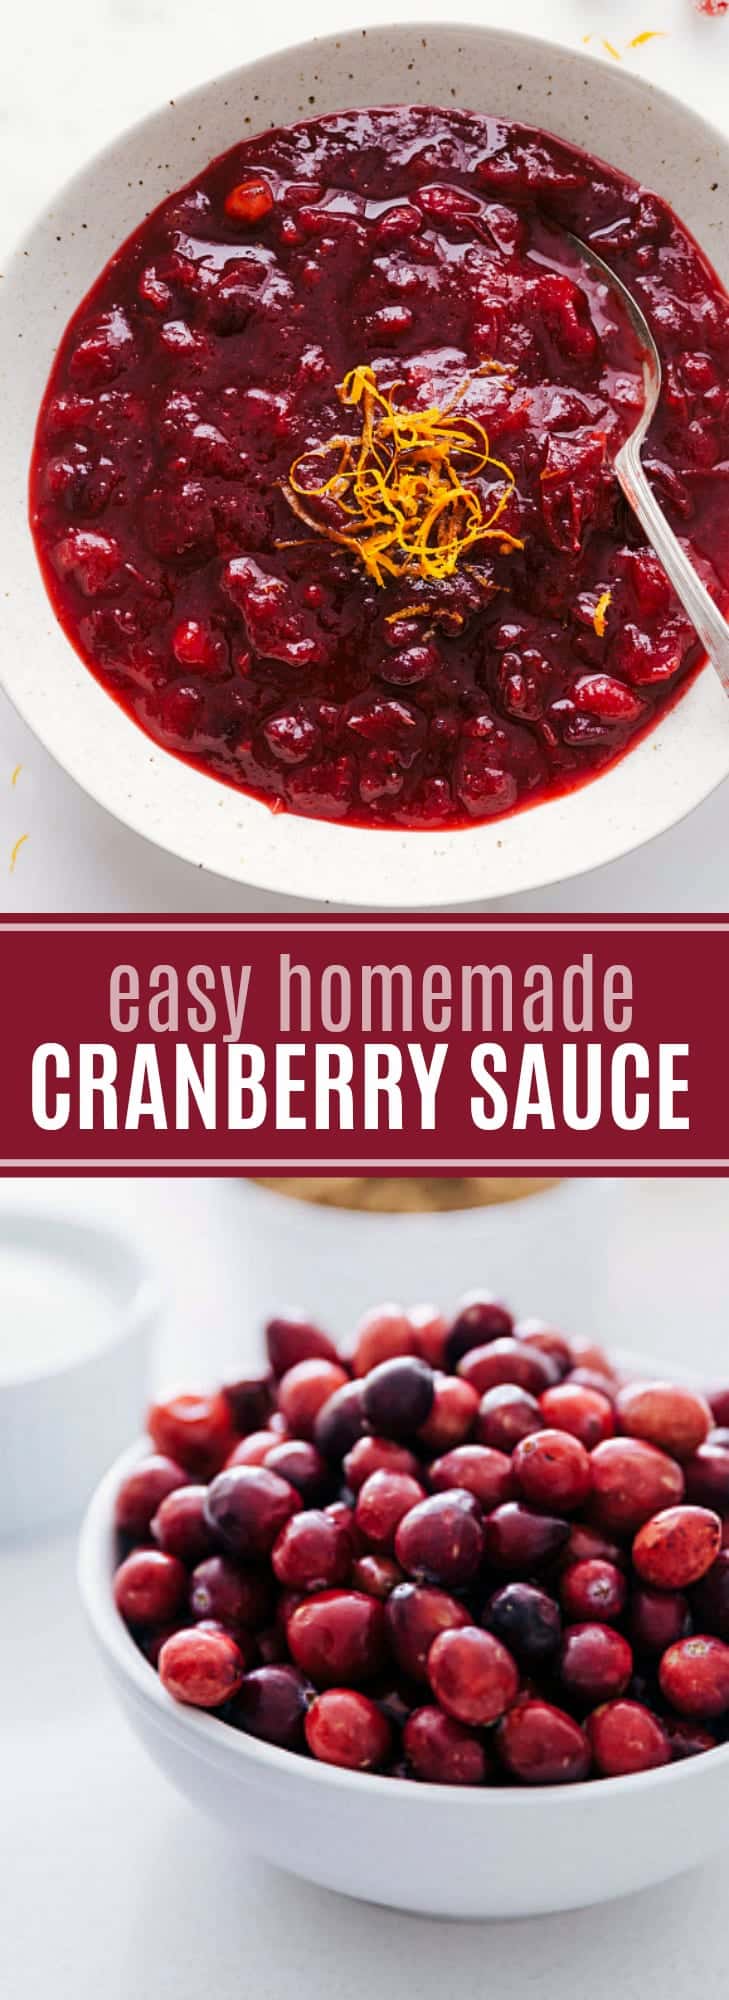 Take your holidays to the next level this year with this delicious homemade cranberry sauce recipe. Sure to be an instant family classic! via chelseasmessyapron.com #cranberry #sauce #recipe #homemade #easy #quick #thanksgiving #christmas #holiday #holidays